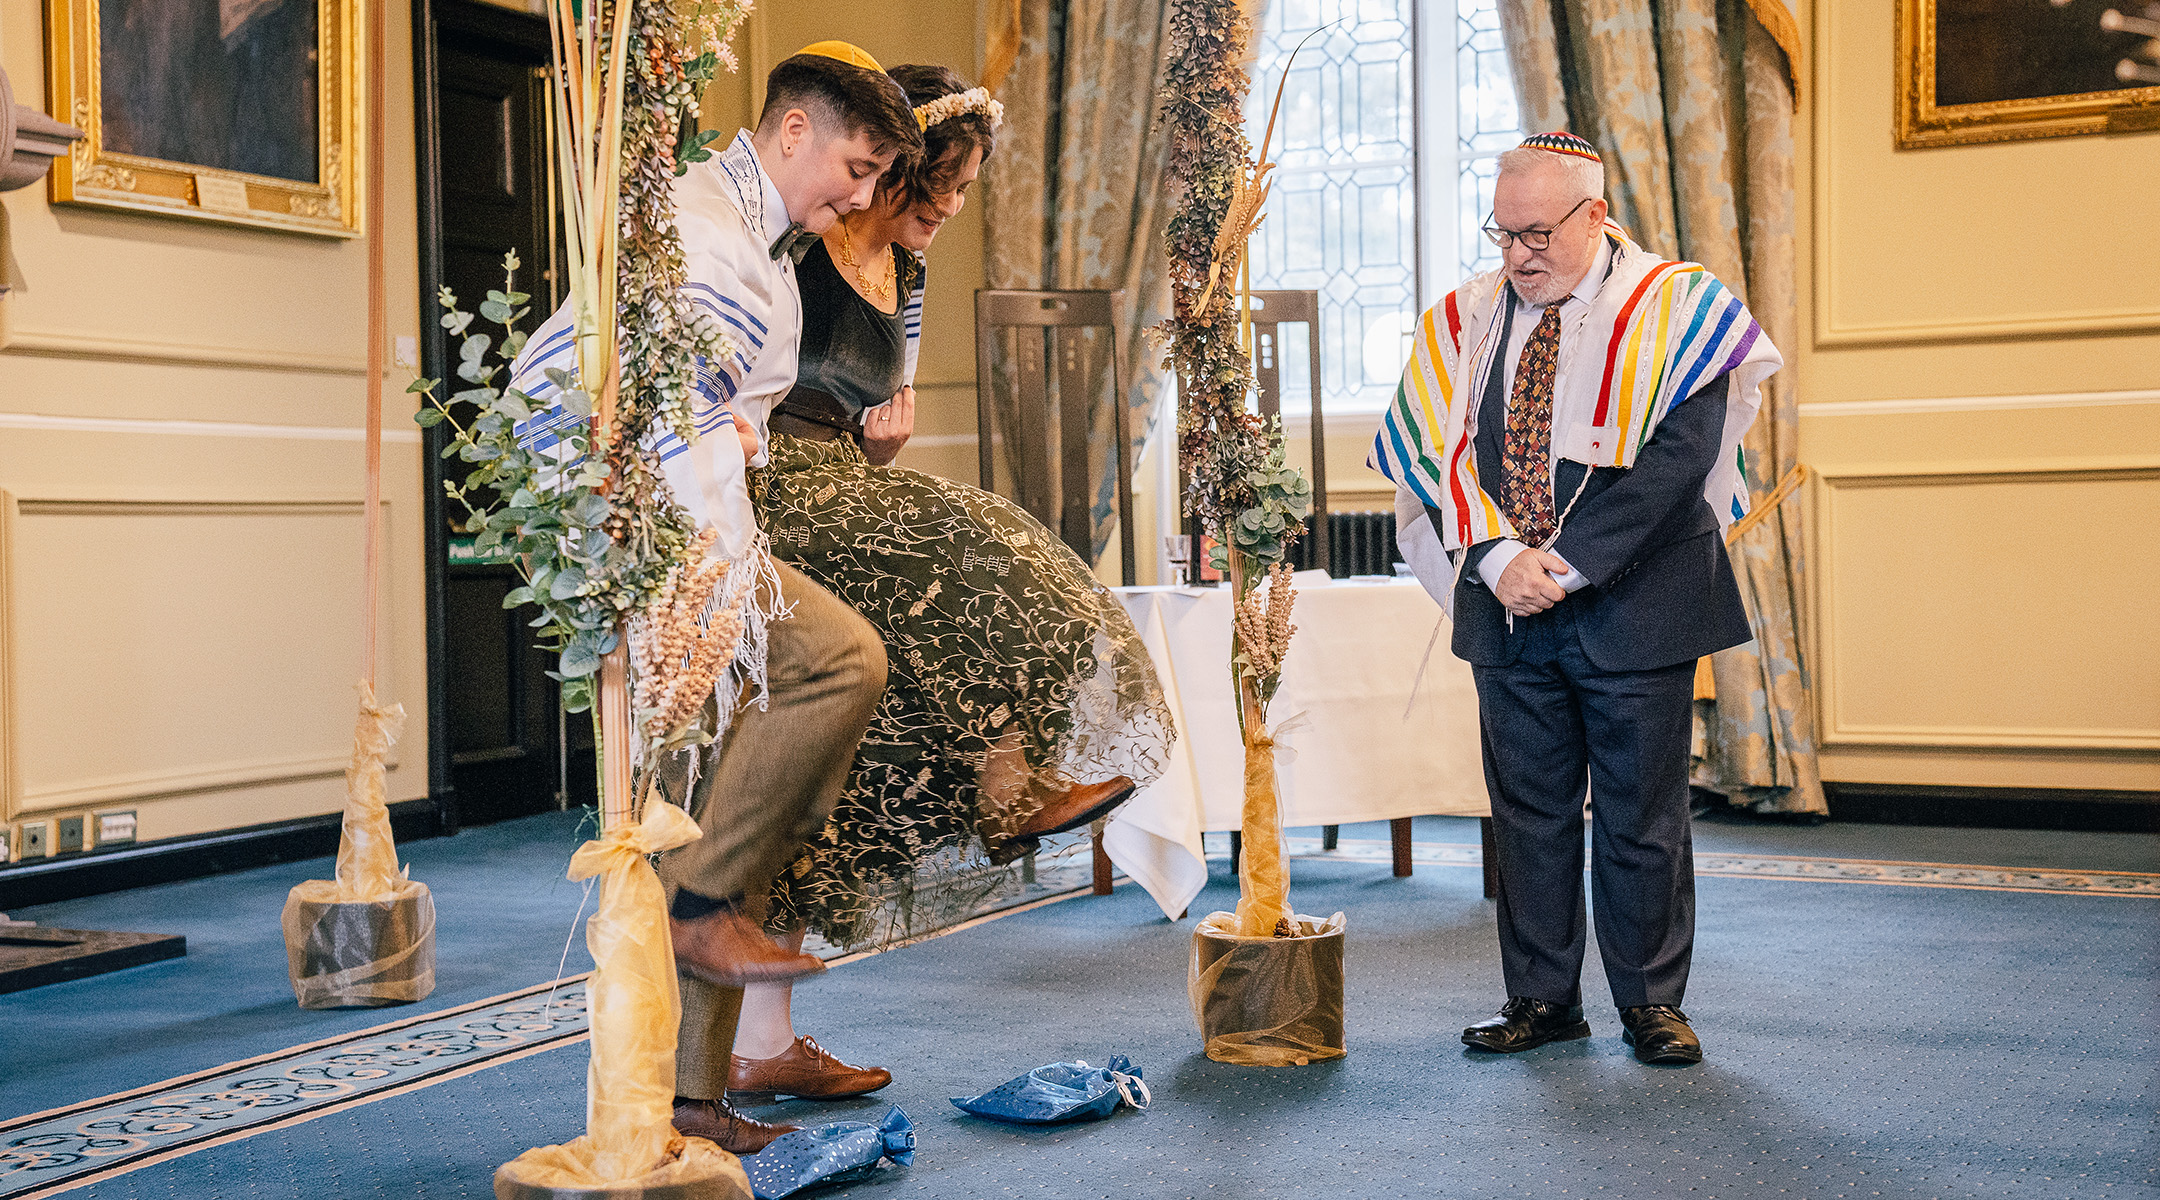 In Edinburgh, the couple found a welcoming Jewish community, where, they said, many of the younger community members are queer. (Fern Photography)